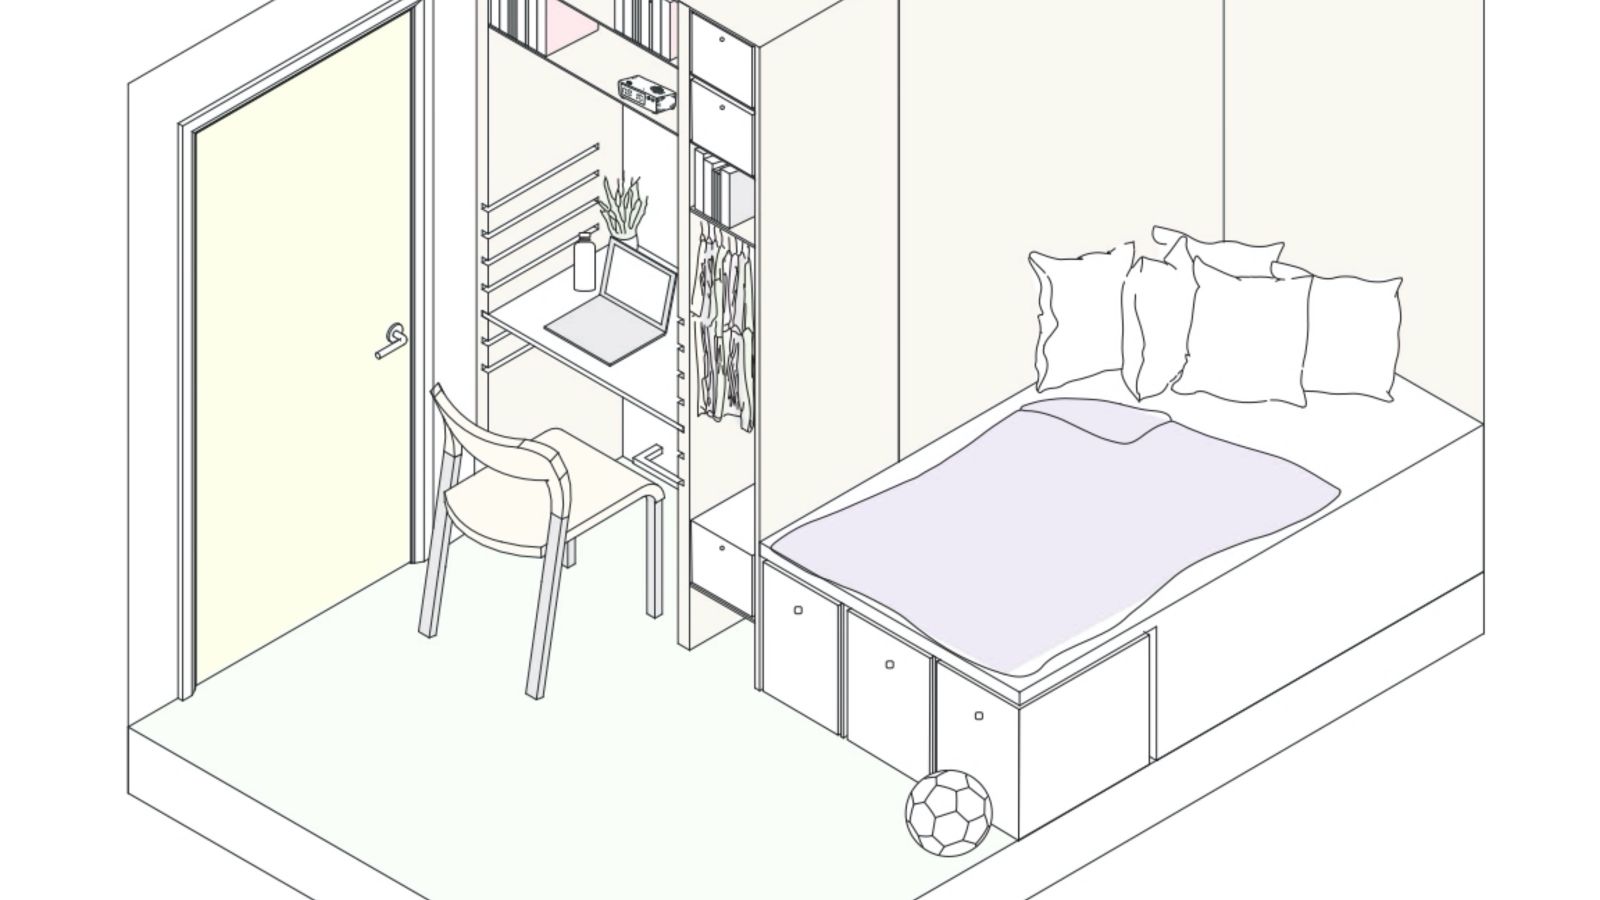 Sketch of a compact studio with a bed, shelf-desk and chair